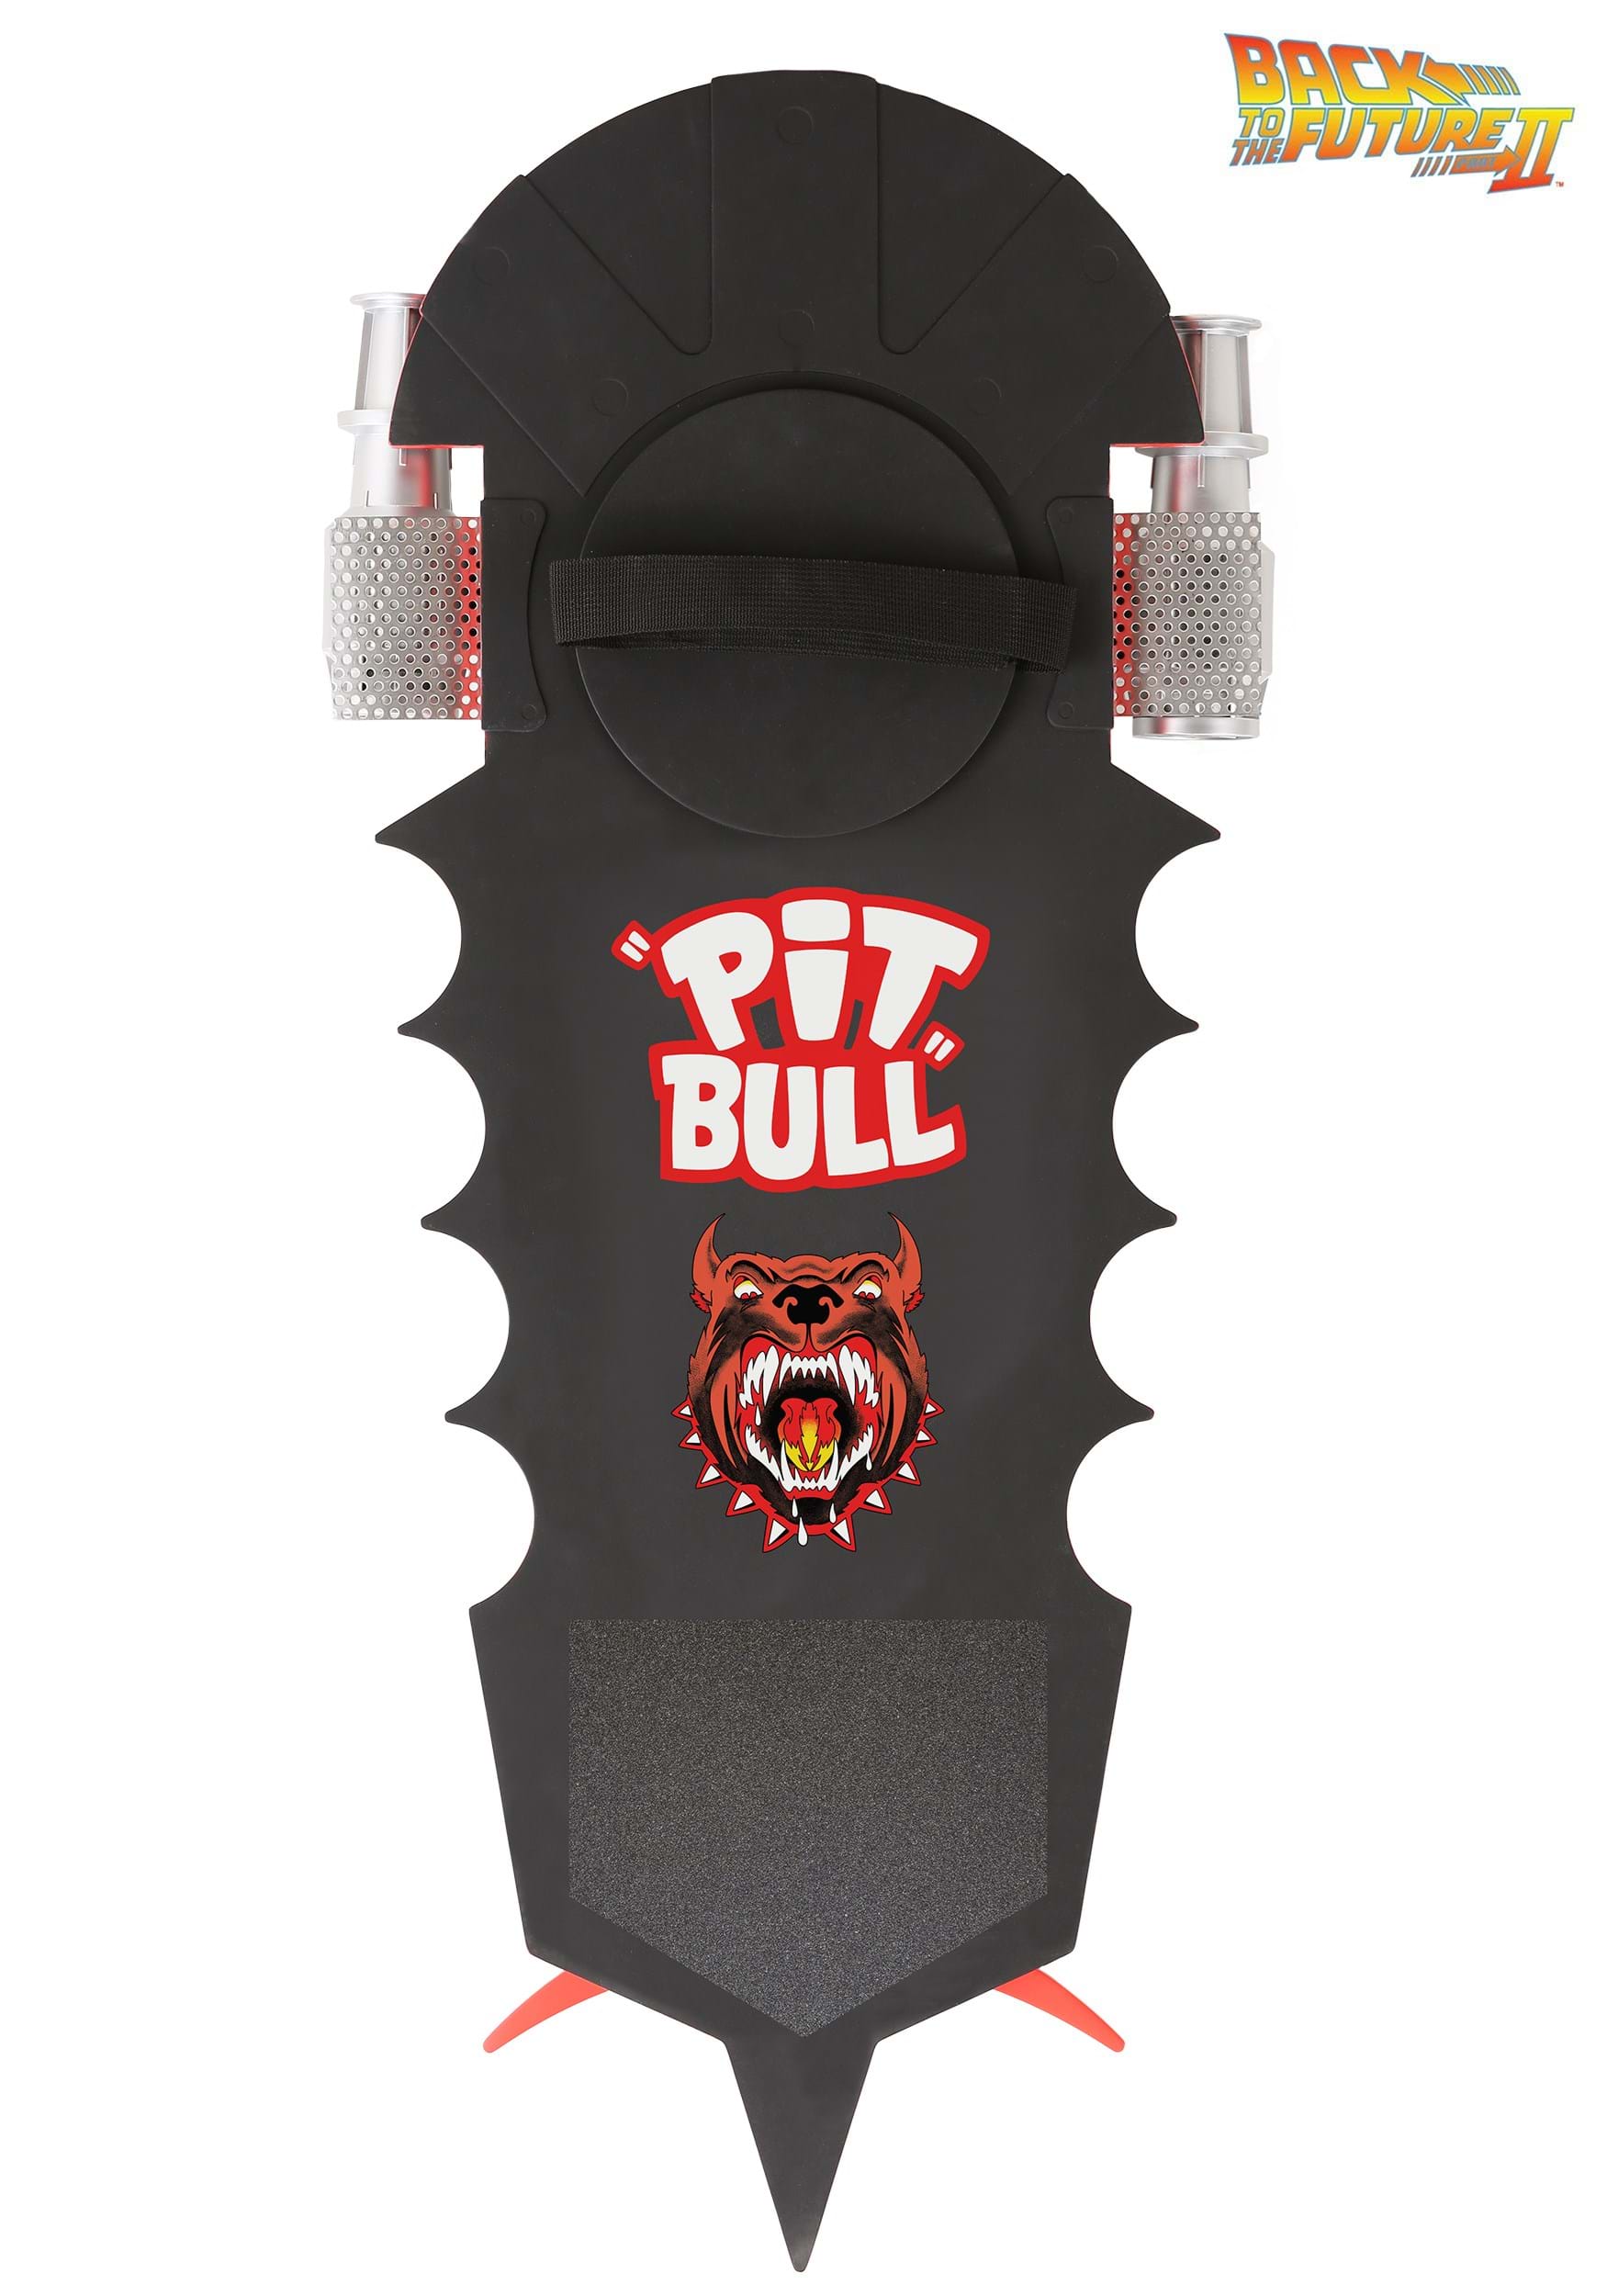 Back to the Future II: Griff’s Pitbull Hoverboard